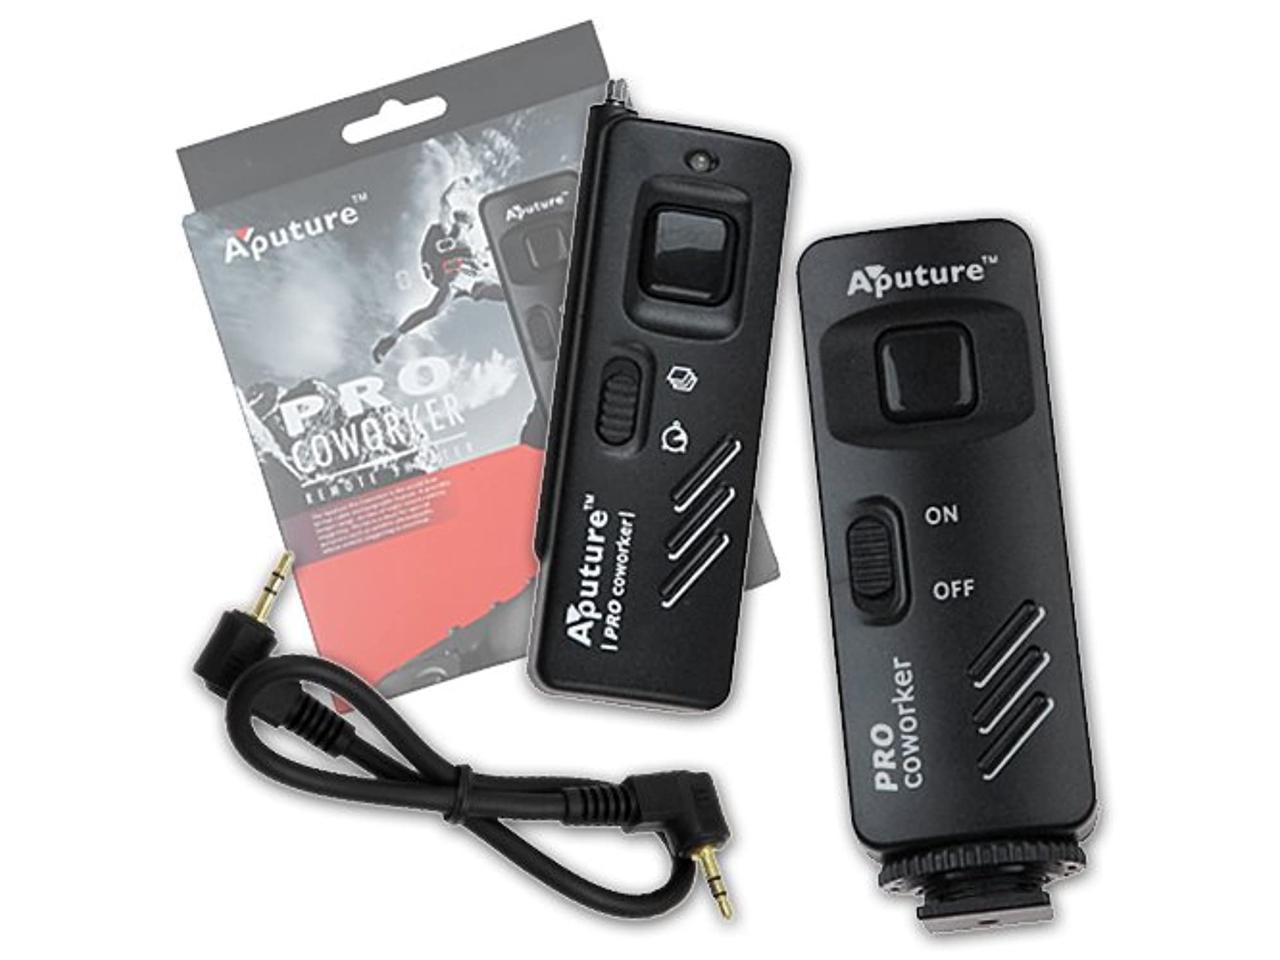 Such as: EOS Rebel Series Replaces Canons RS 60-E3 Aputure Coworker Wireless Remote Shutter Release for Canon Cameras - 1C Connection